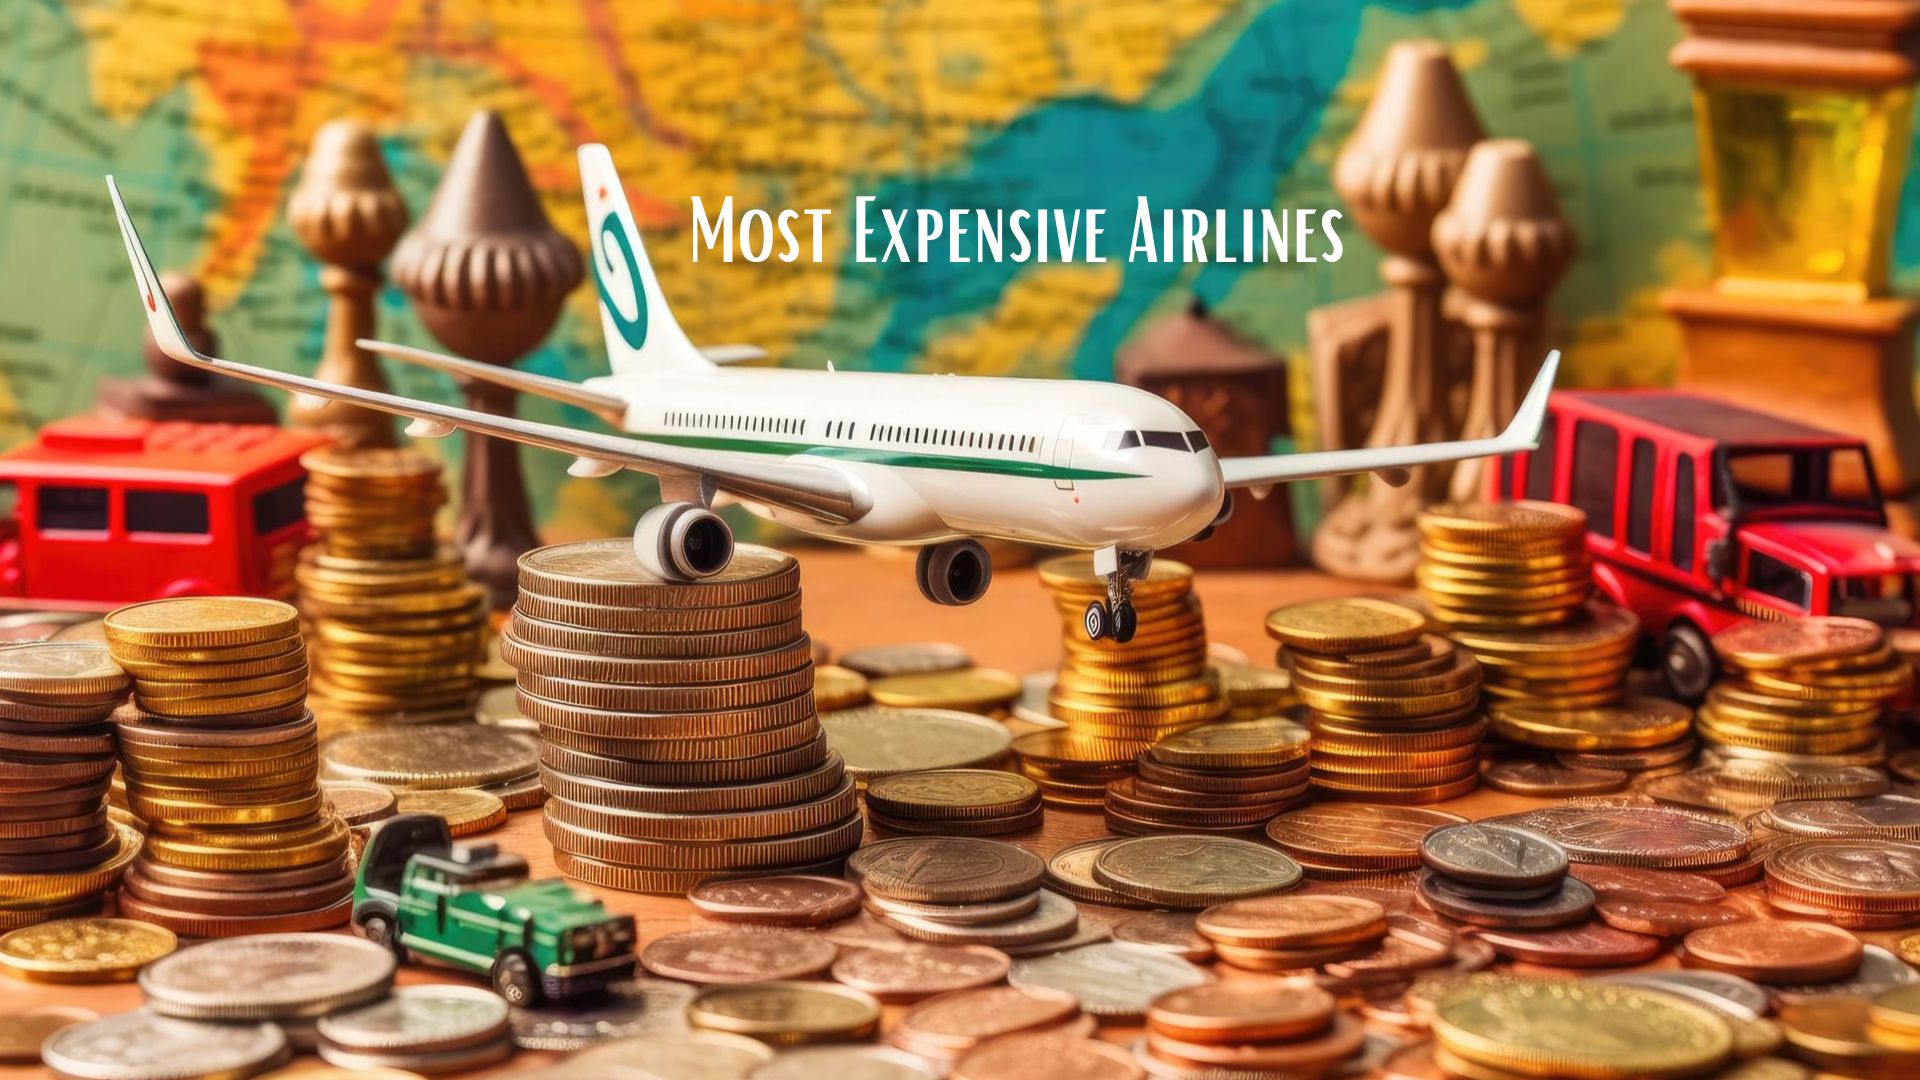 Top 10 Most Expensive Airlines in the World